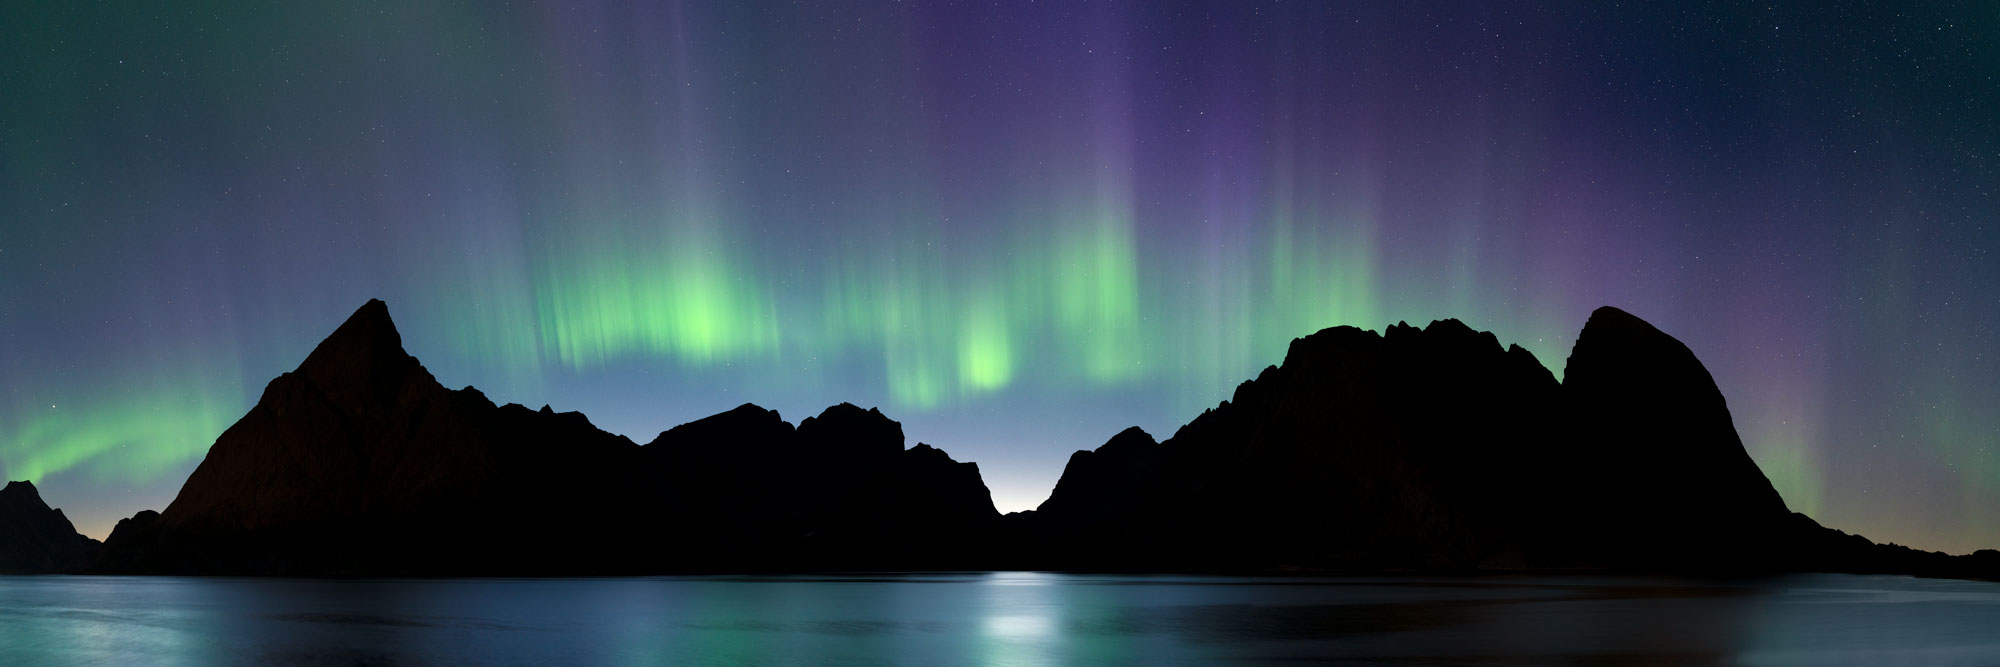 Panorama of the Northern Lights above the mountains in the Lofoten Islands